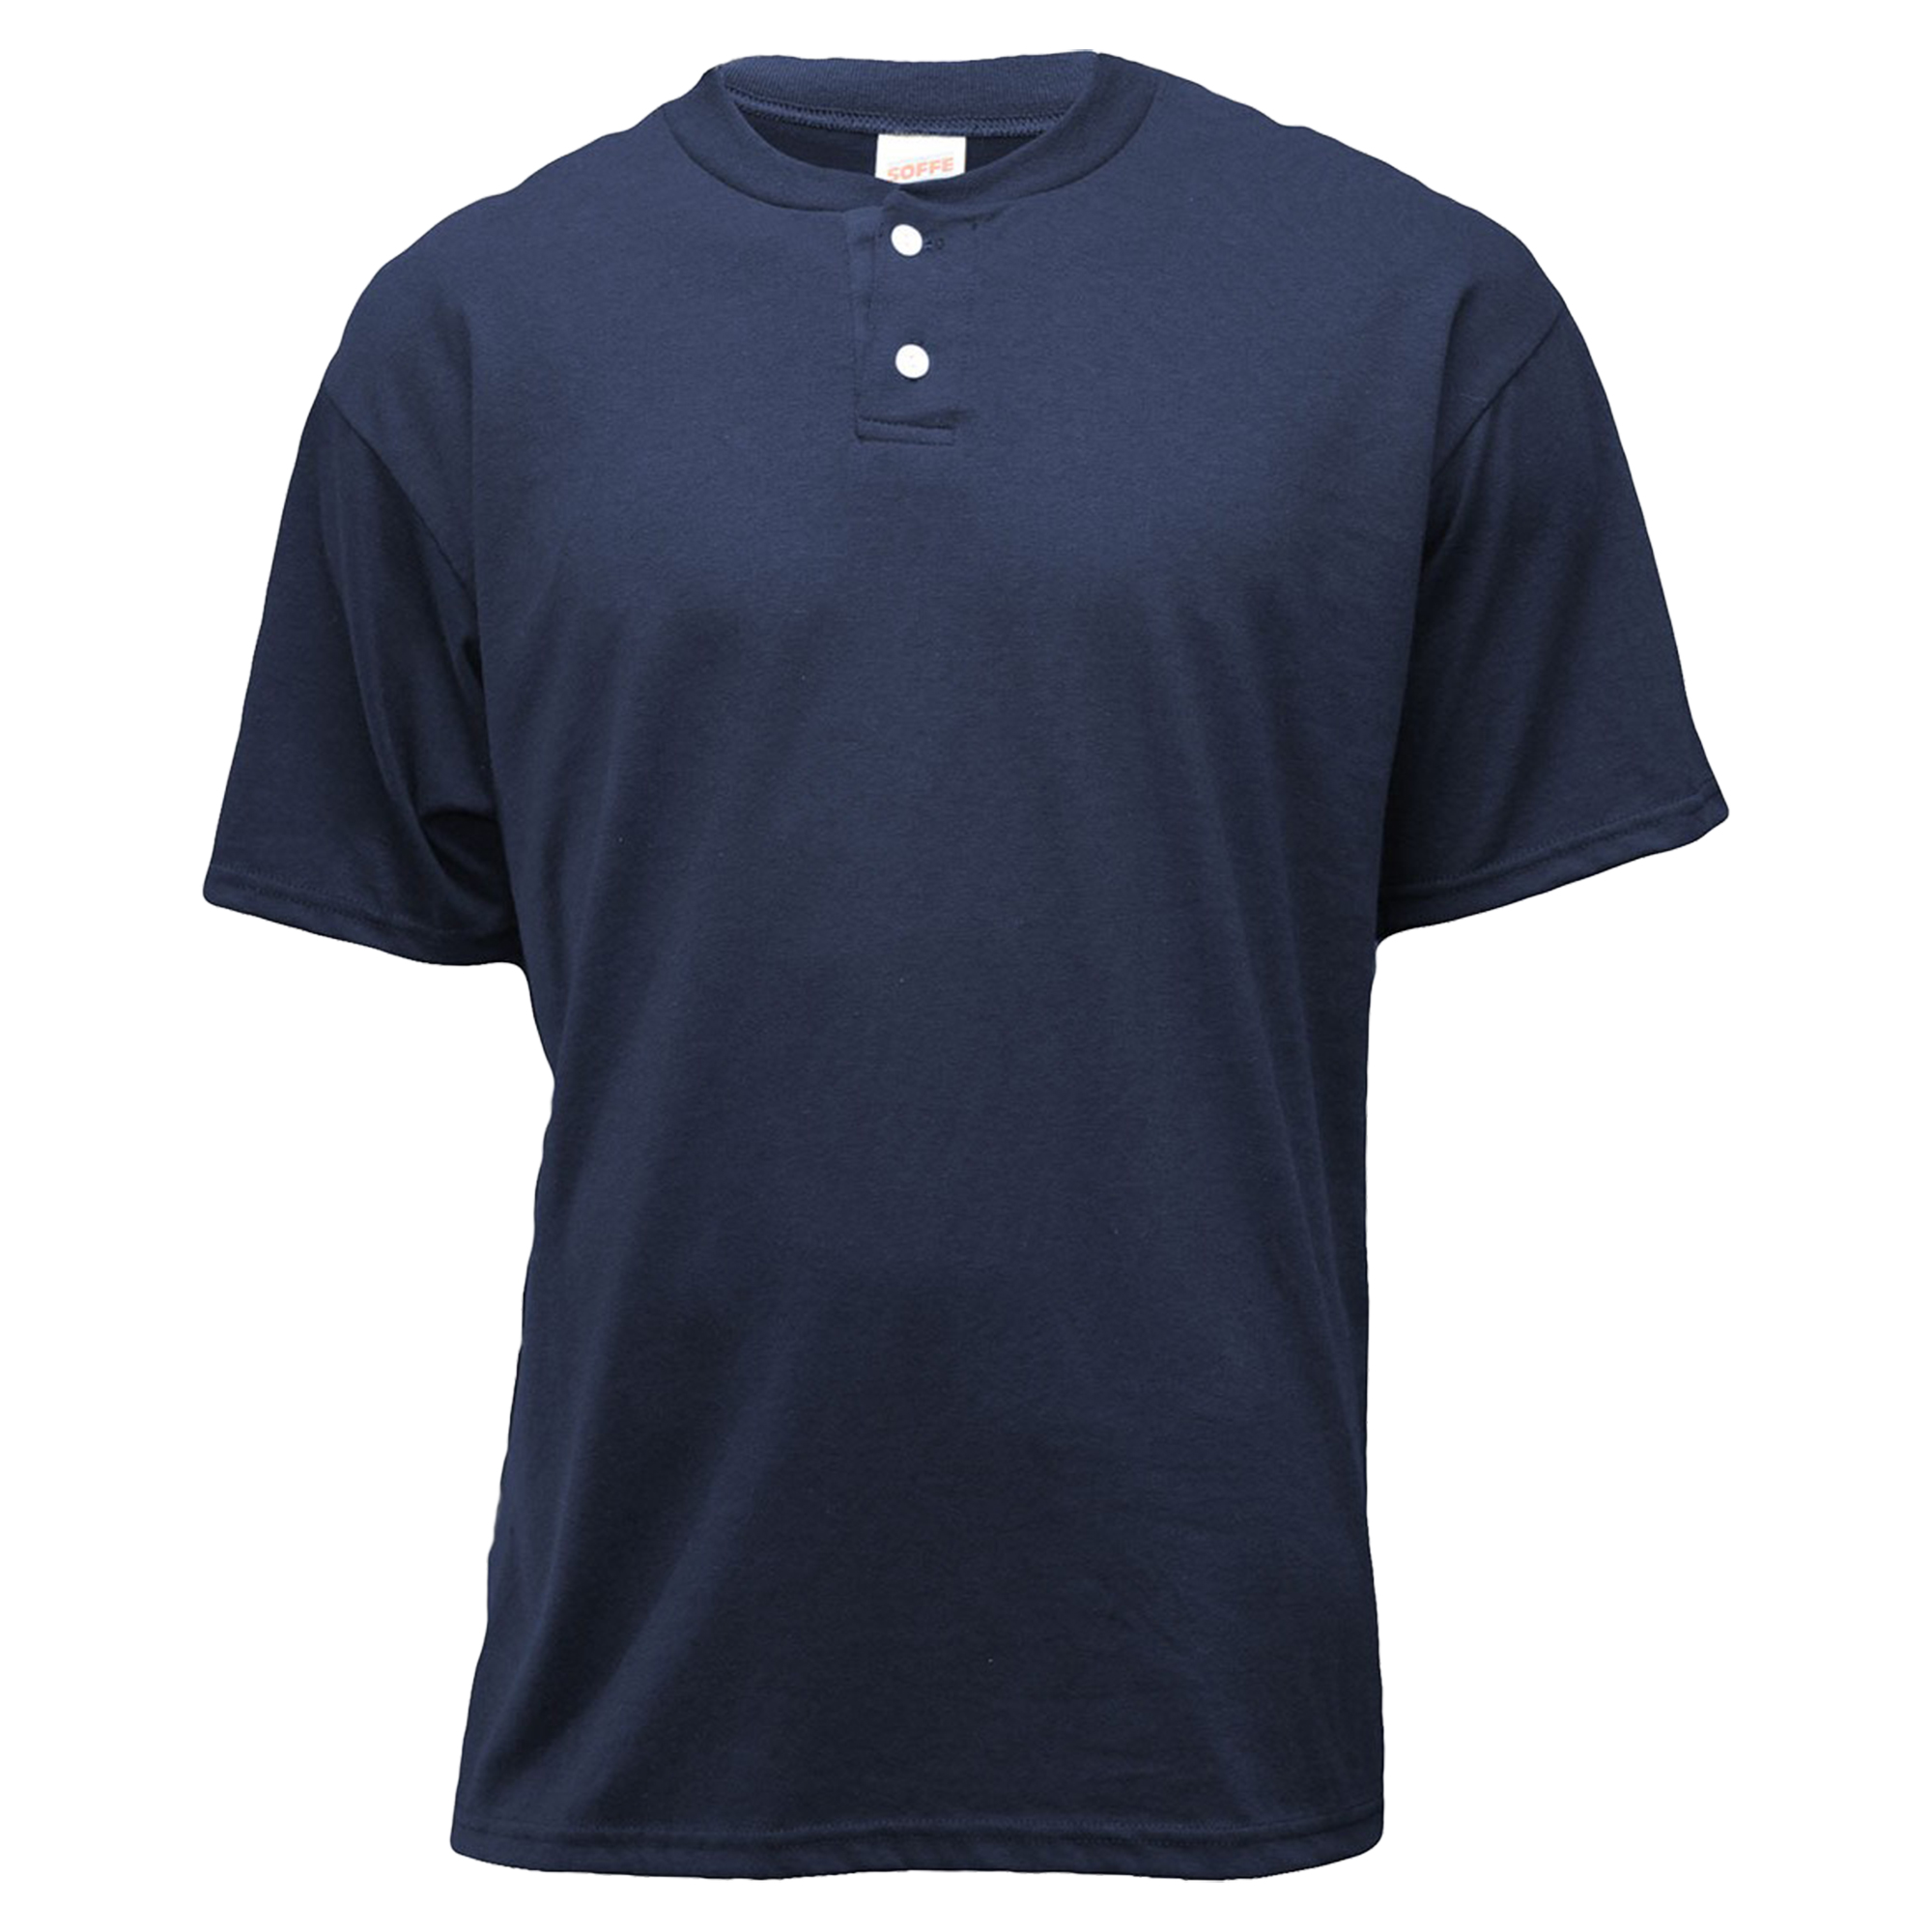 Soffe Men's Short Sleeve Two Button Henley Placket Shirt - image 1 of 1